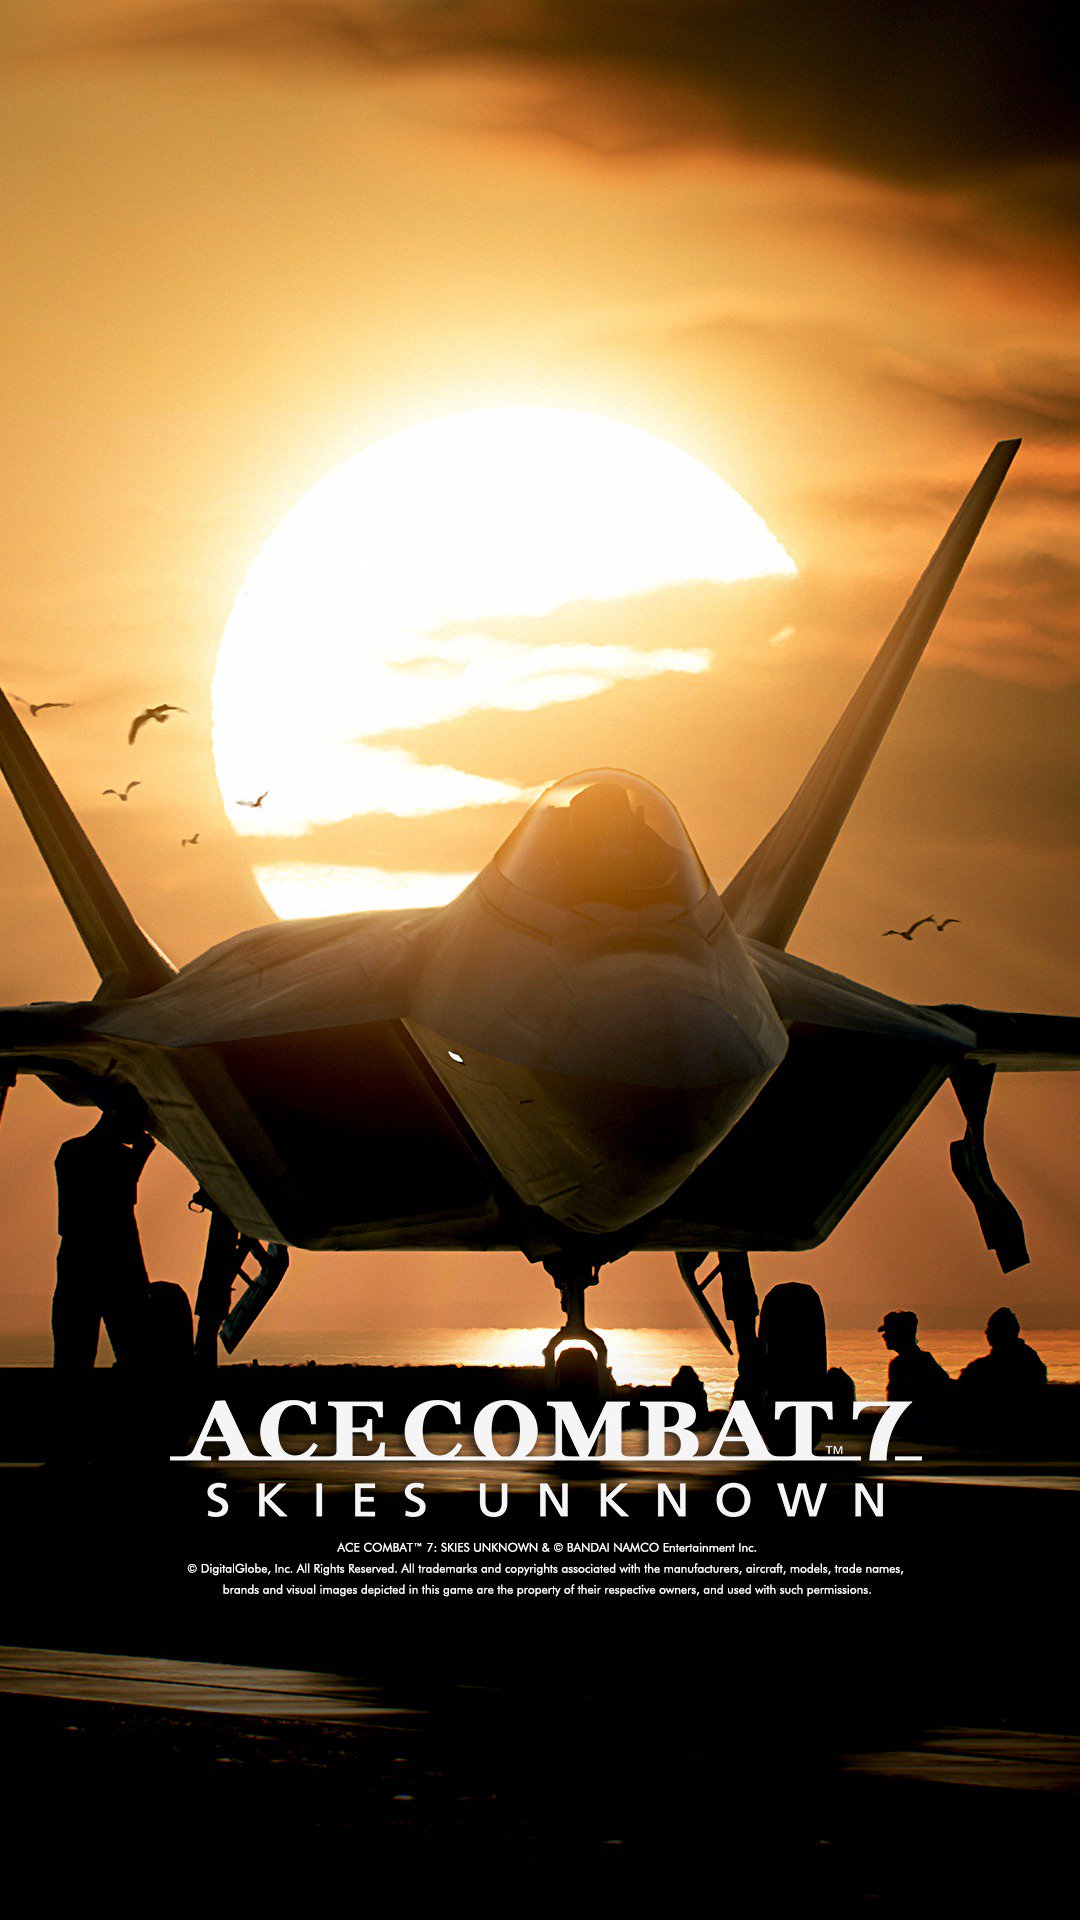 Ace Combat Fan Happypilot98 Project Aces First Thing I Thought When I Saw The Pic Twitter